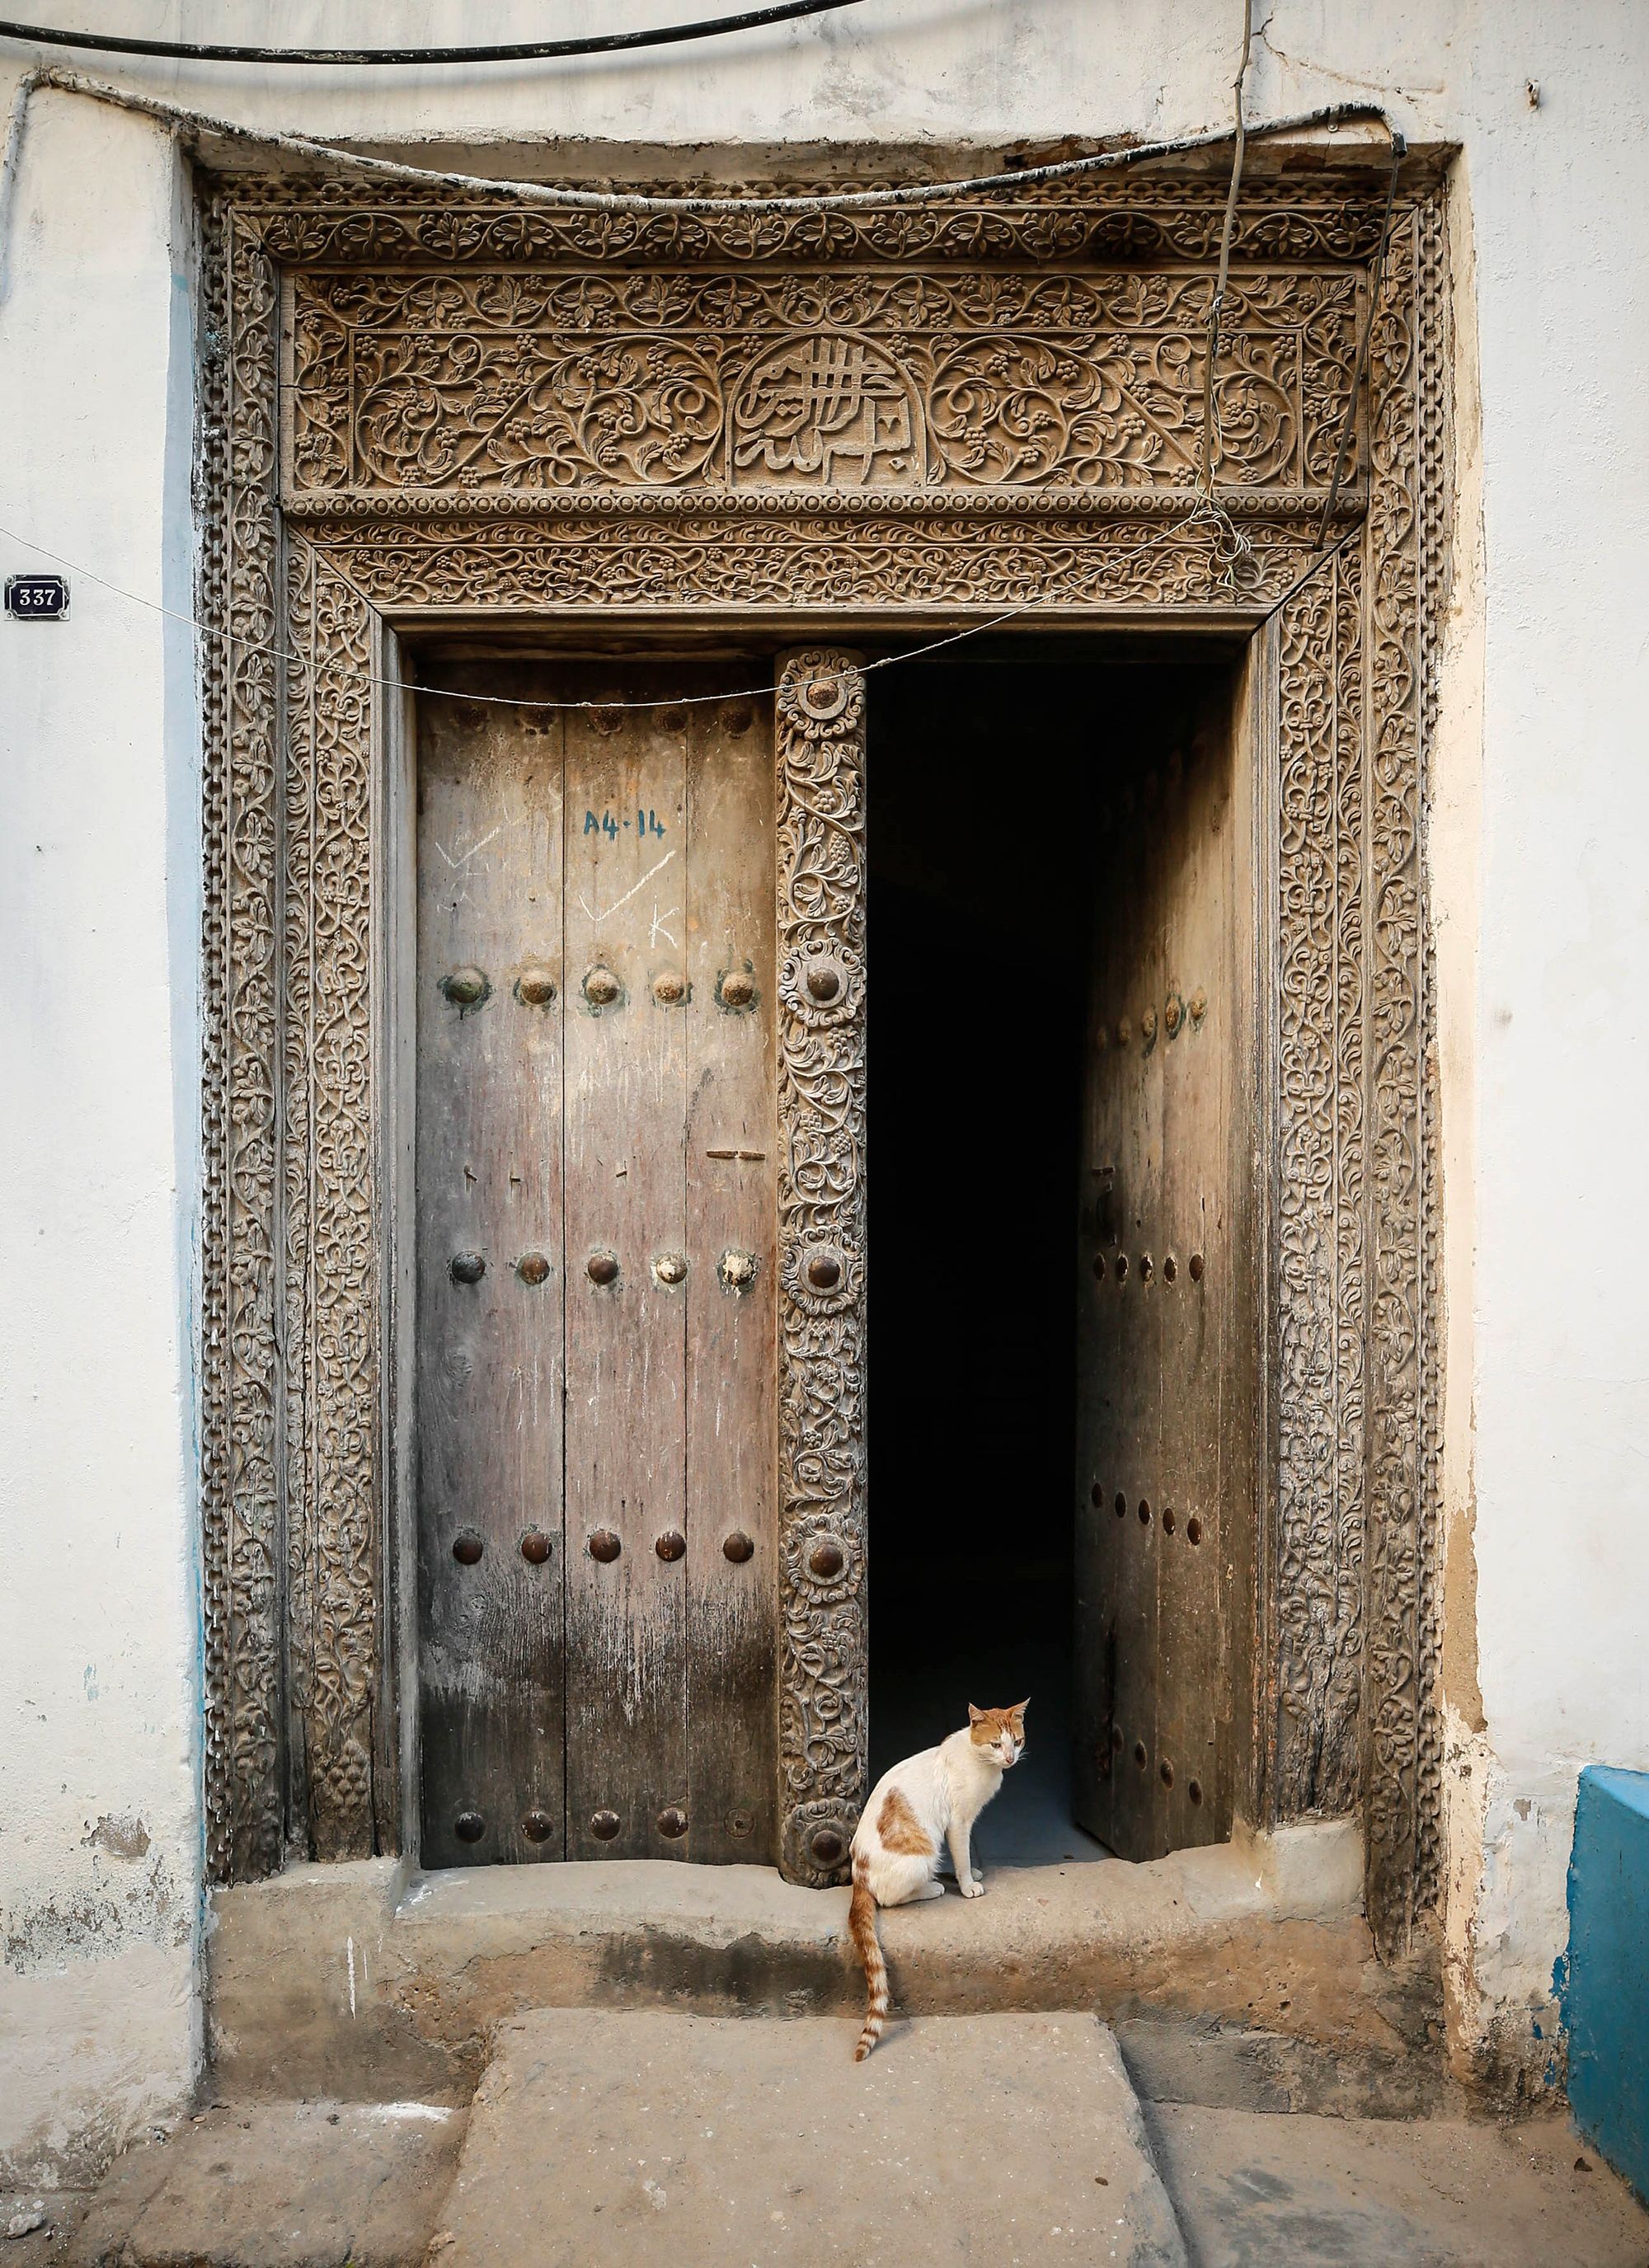 One of Stone Town's ornately carved doors.